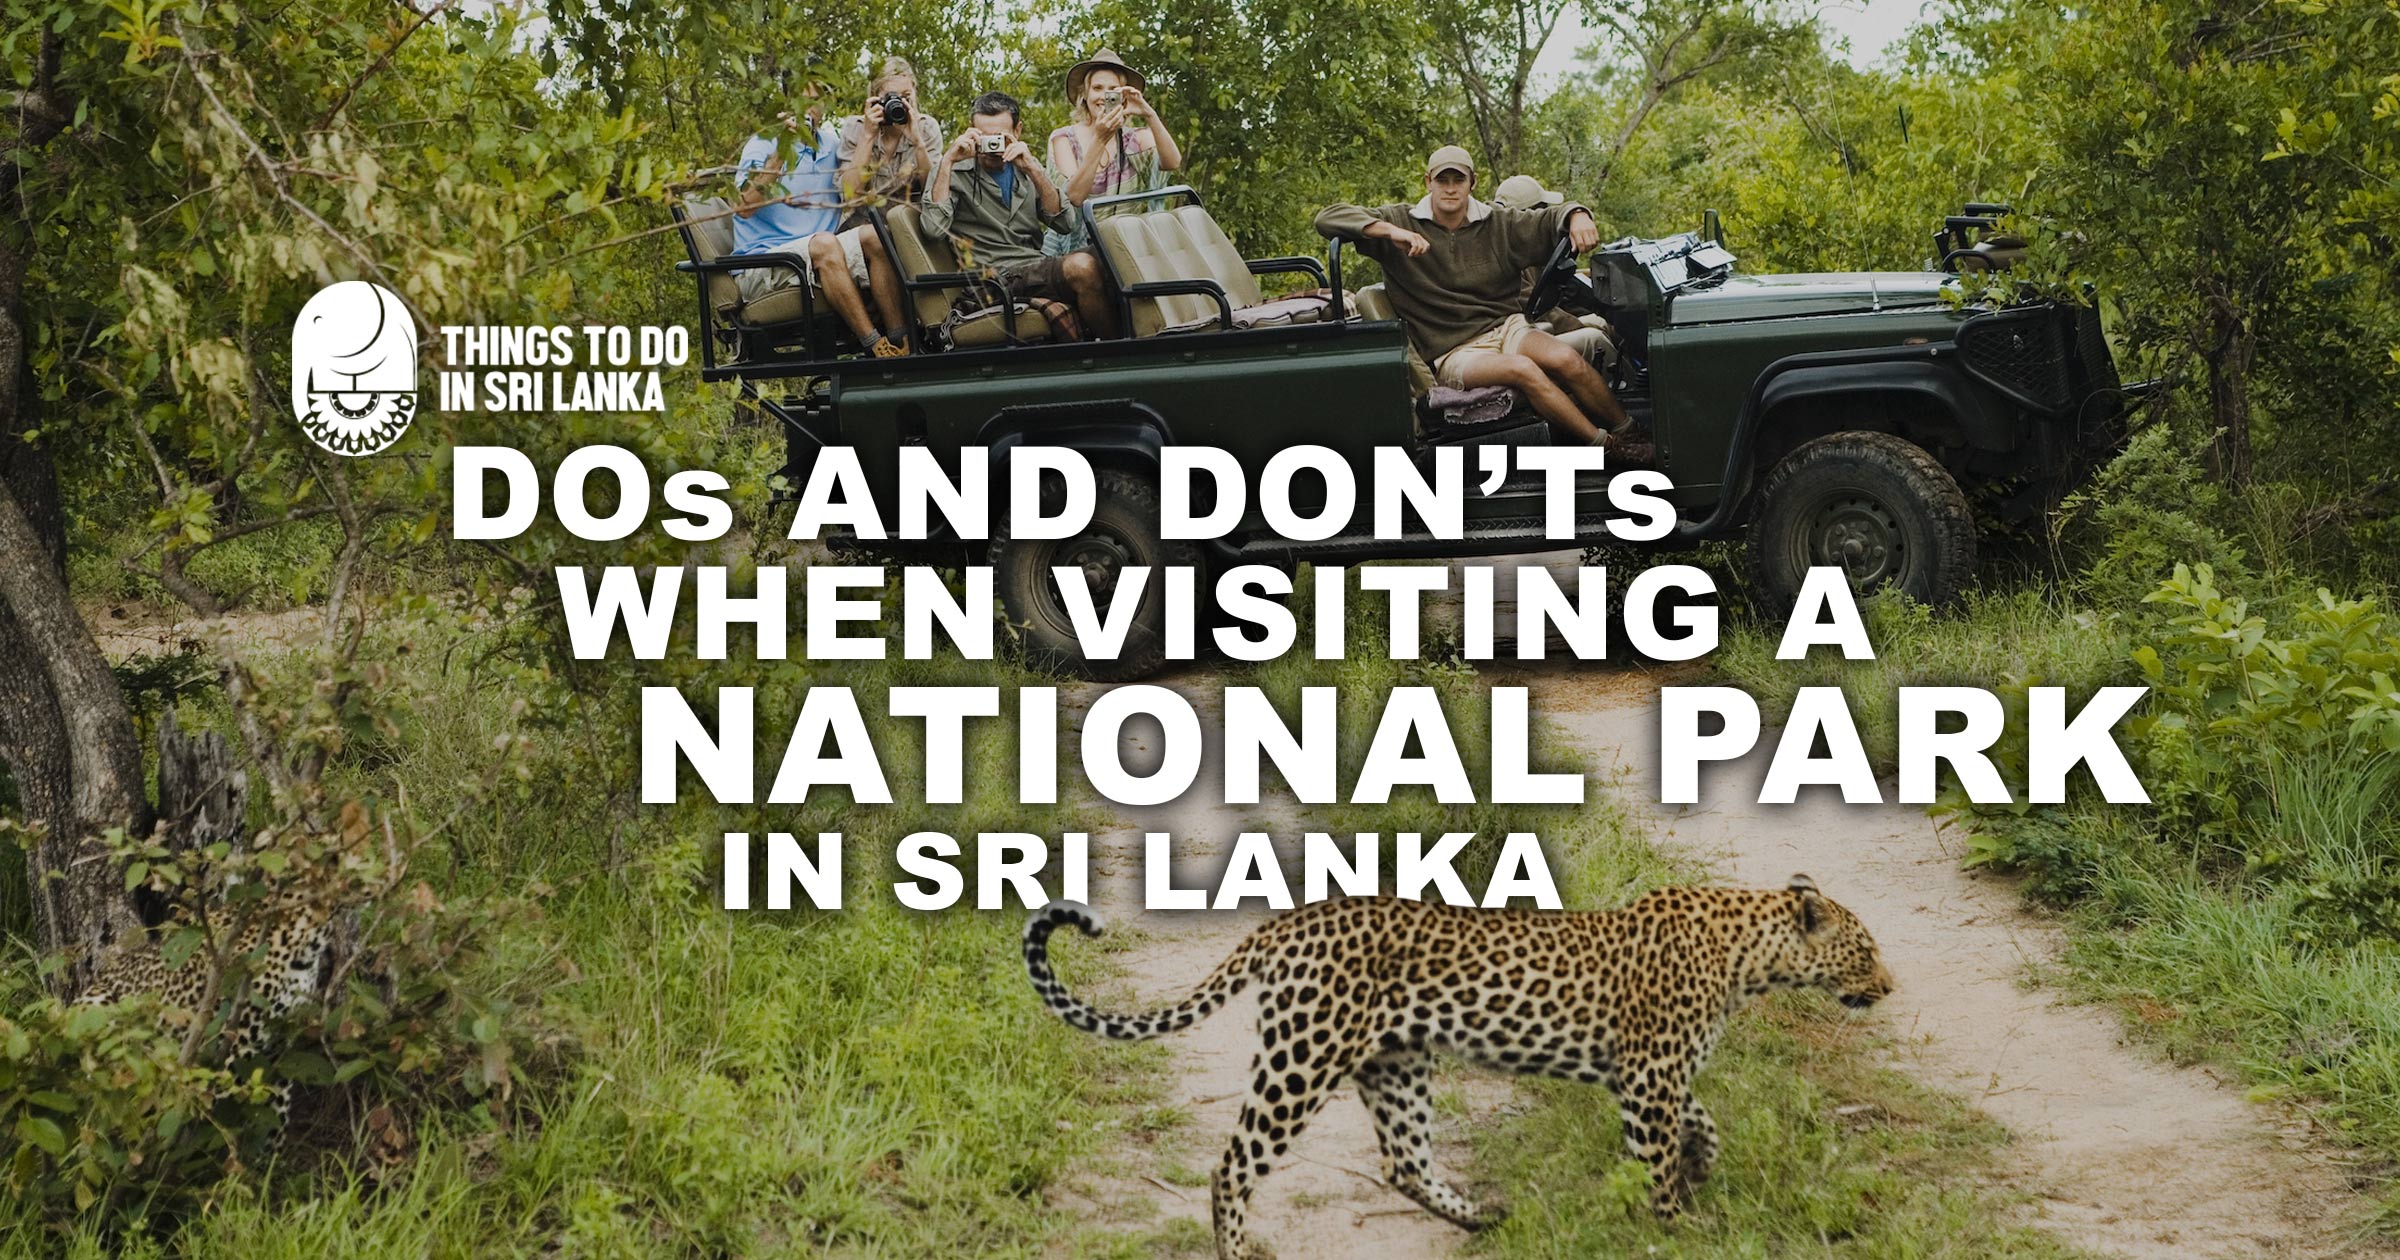 Dos and Don’ts When Visiting a National Park in Sri Lanka